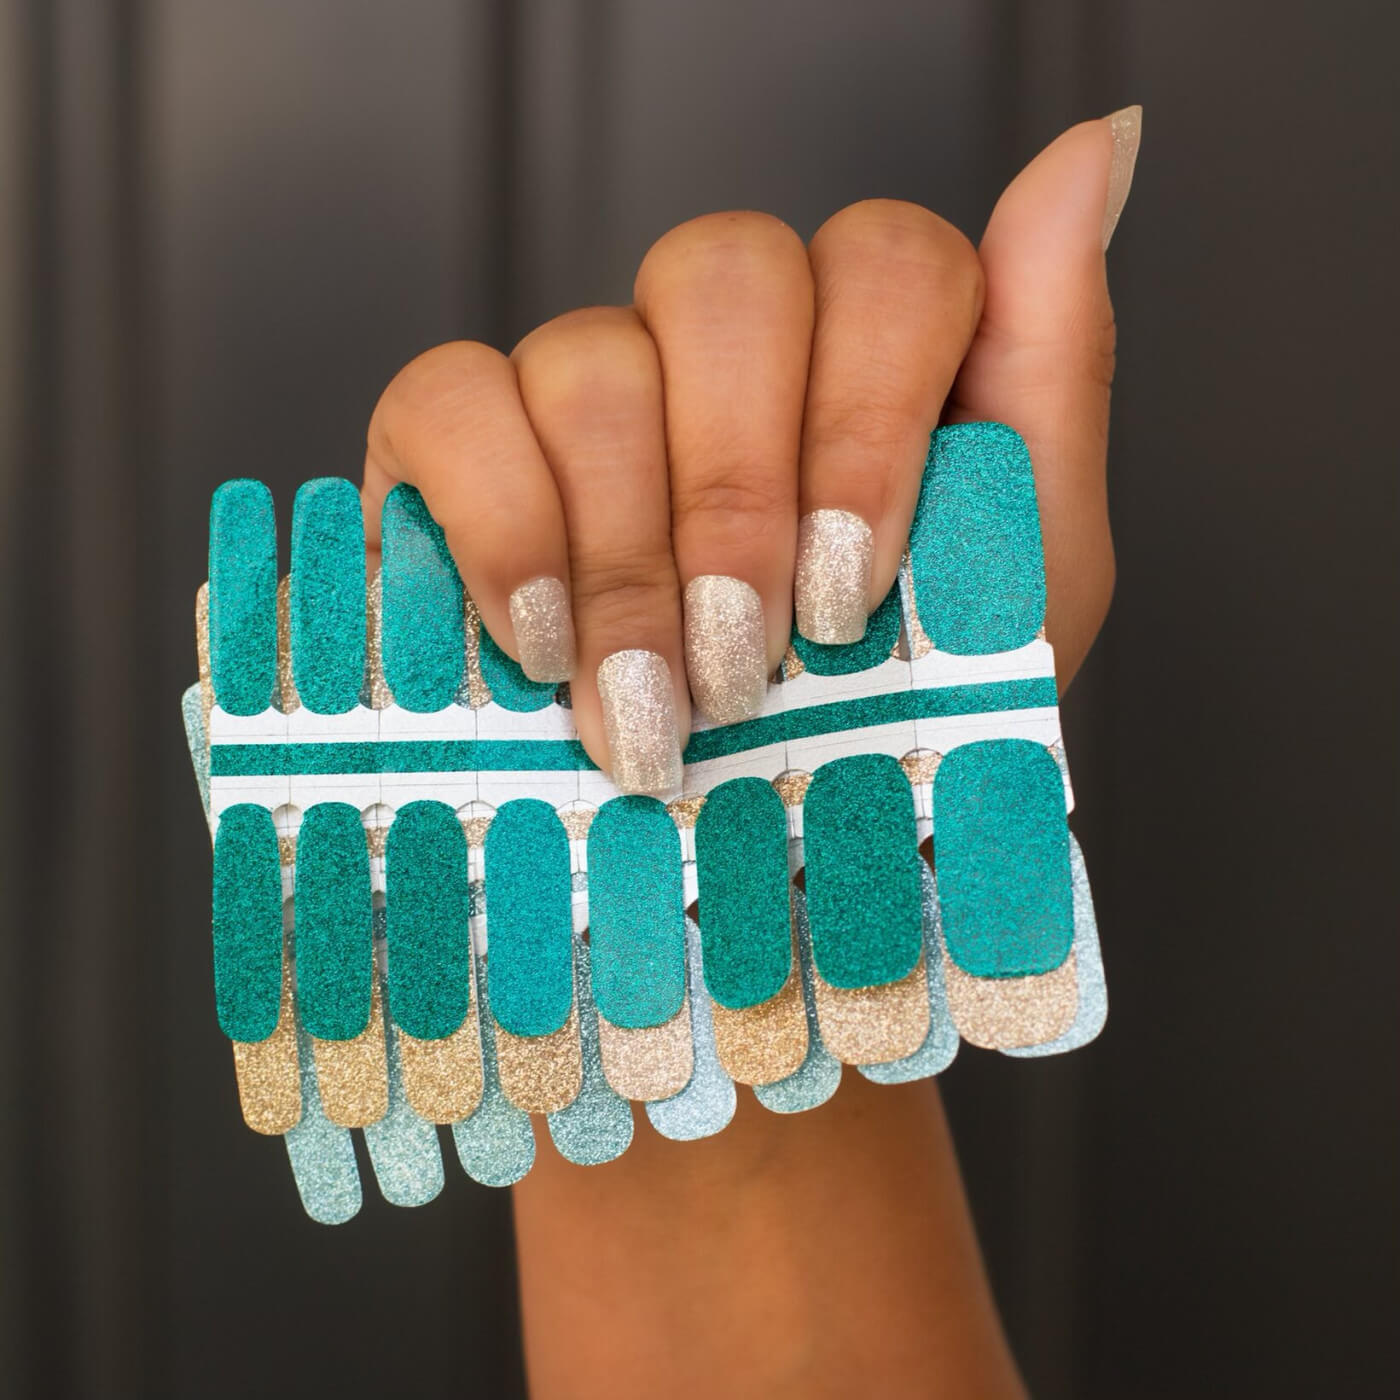 ARE GEL NAIL WRAPS, STICKERS OR STRIPS BAD FOR YOUR NAILS?